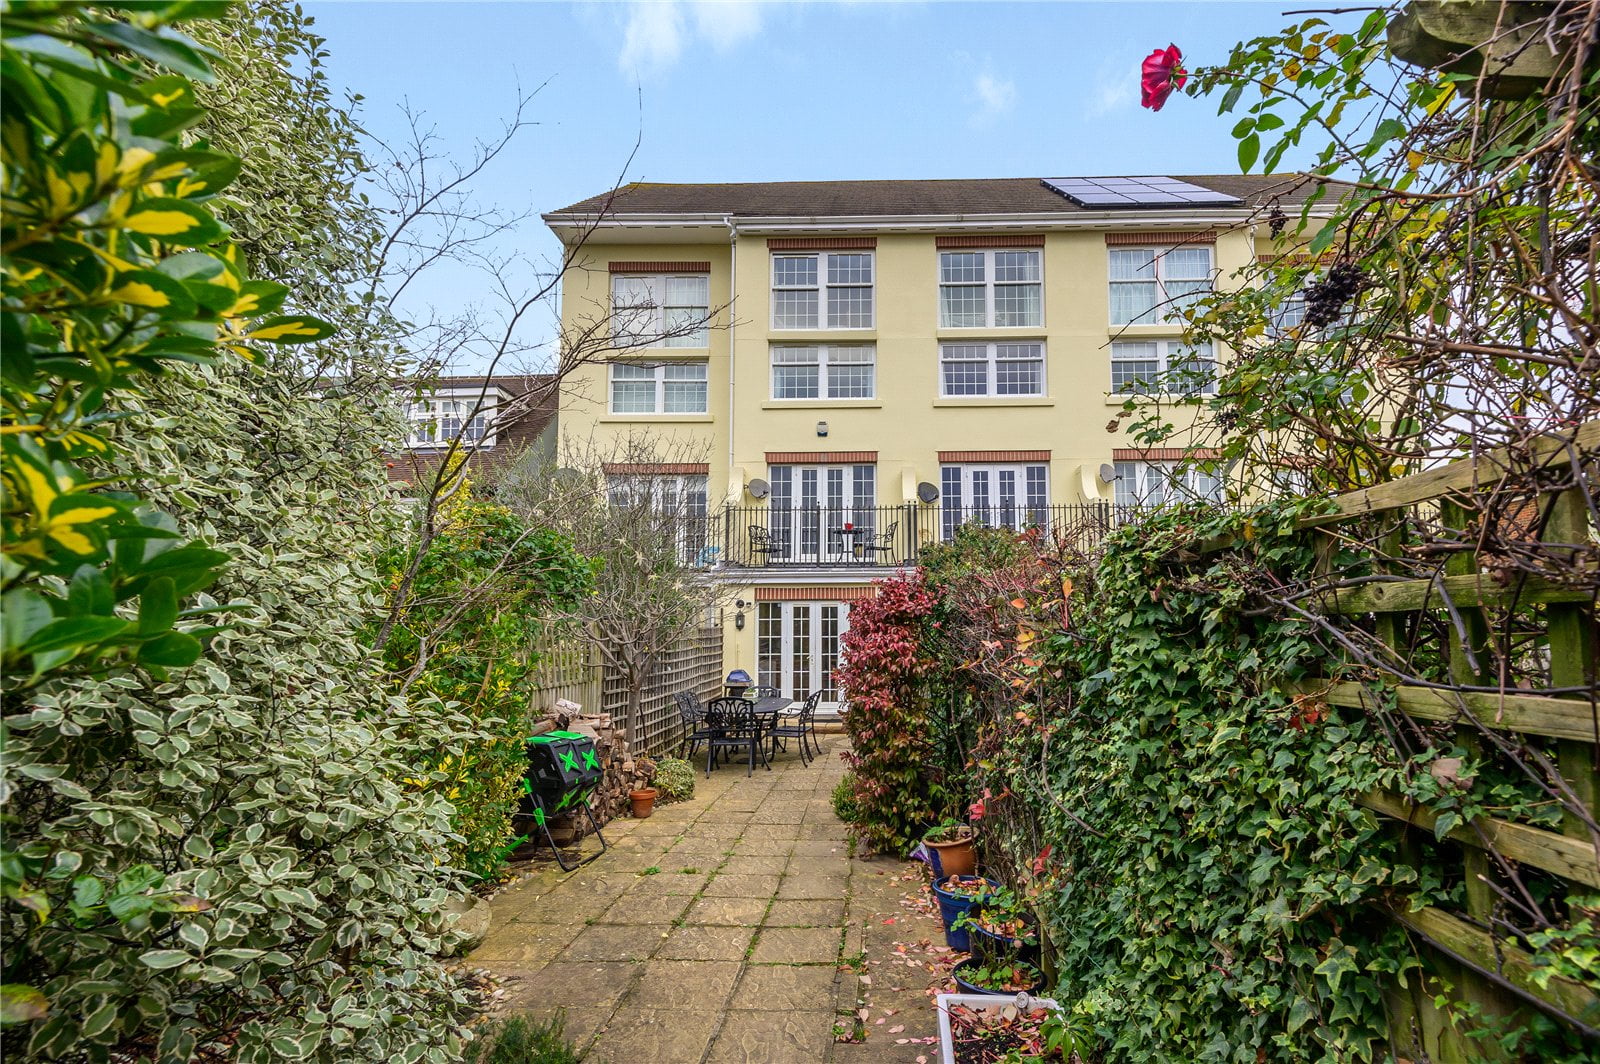 Lower Street, Pulborough, West Sussex,  | residential-sales